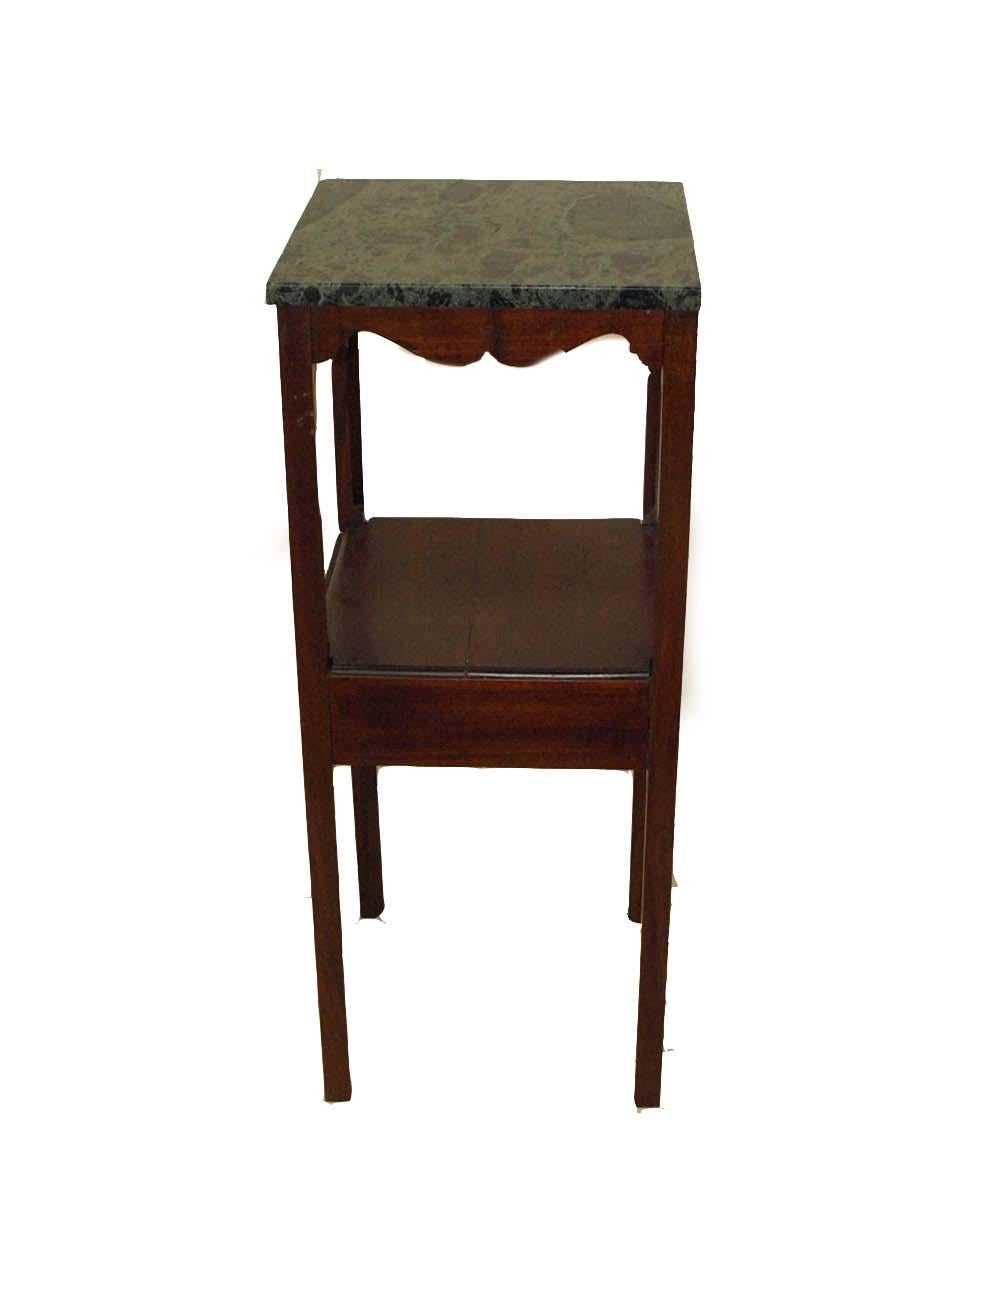 Early 19th Century English Mahogany Marble Top Stand For Sale